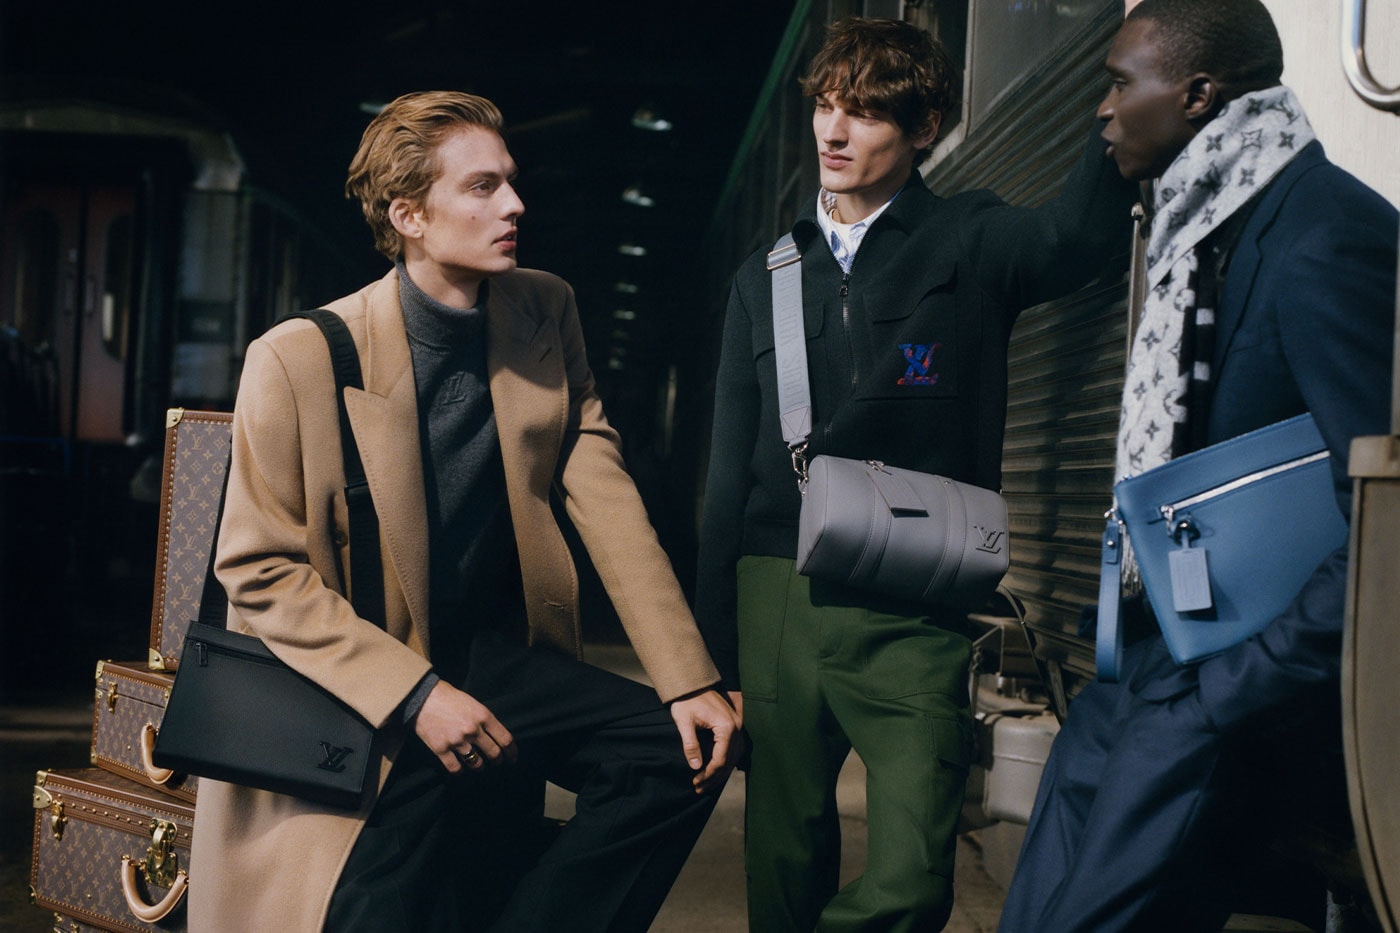 Latest Louis Vuitton Aerogram Collection Keeps Virgil Abloh's Vision of  Modern Travel Alive